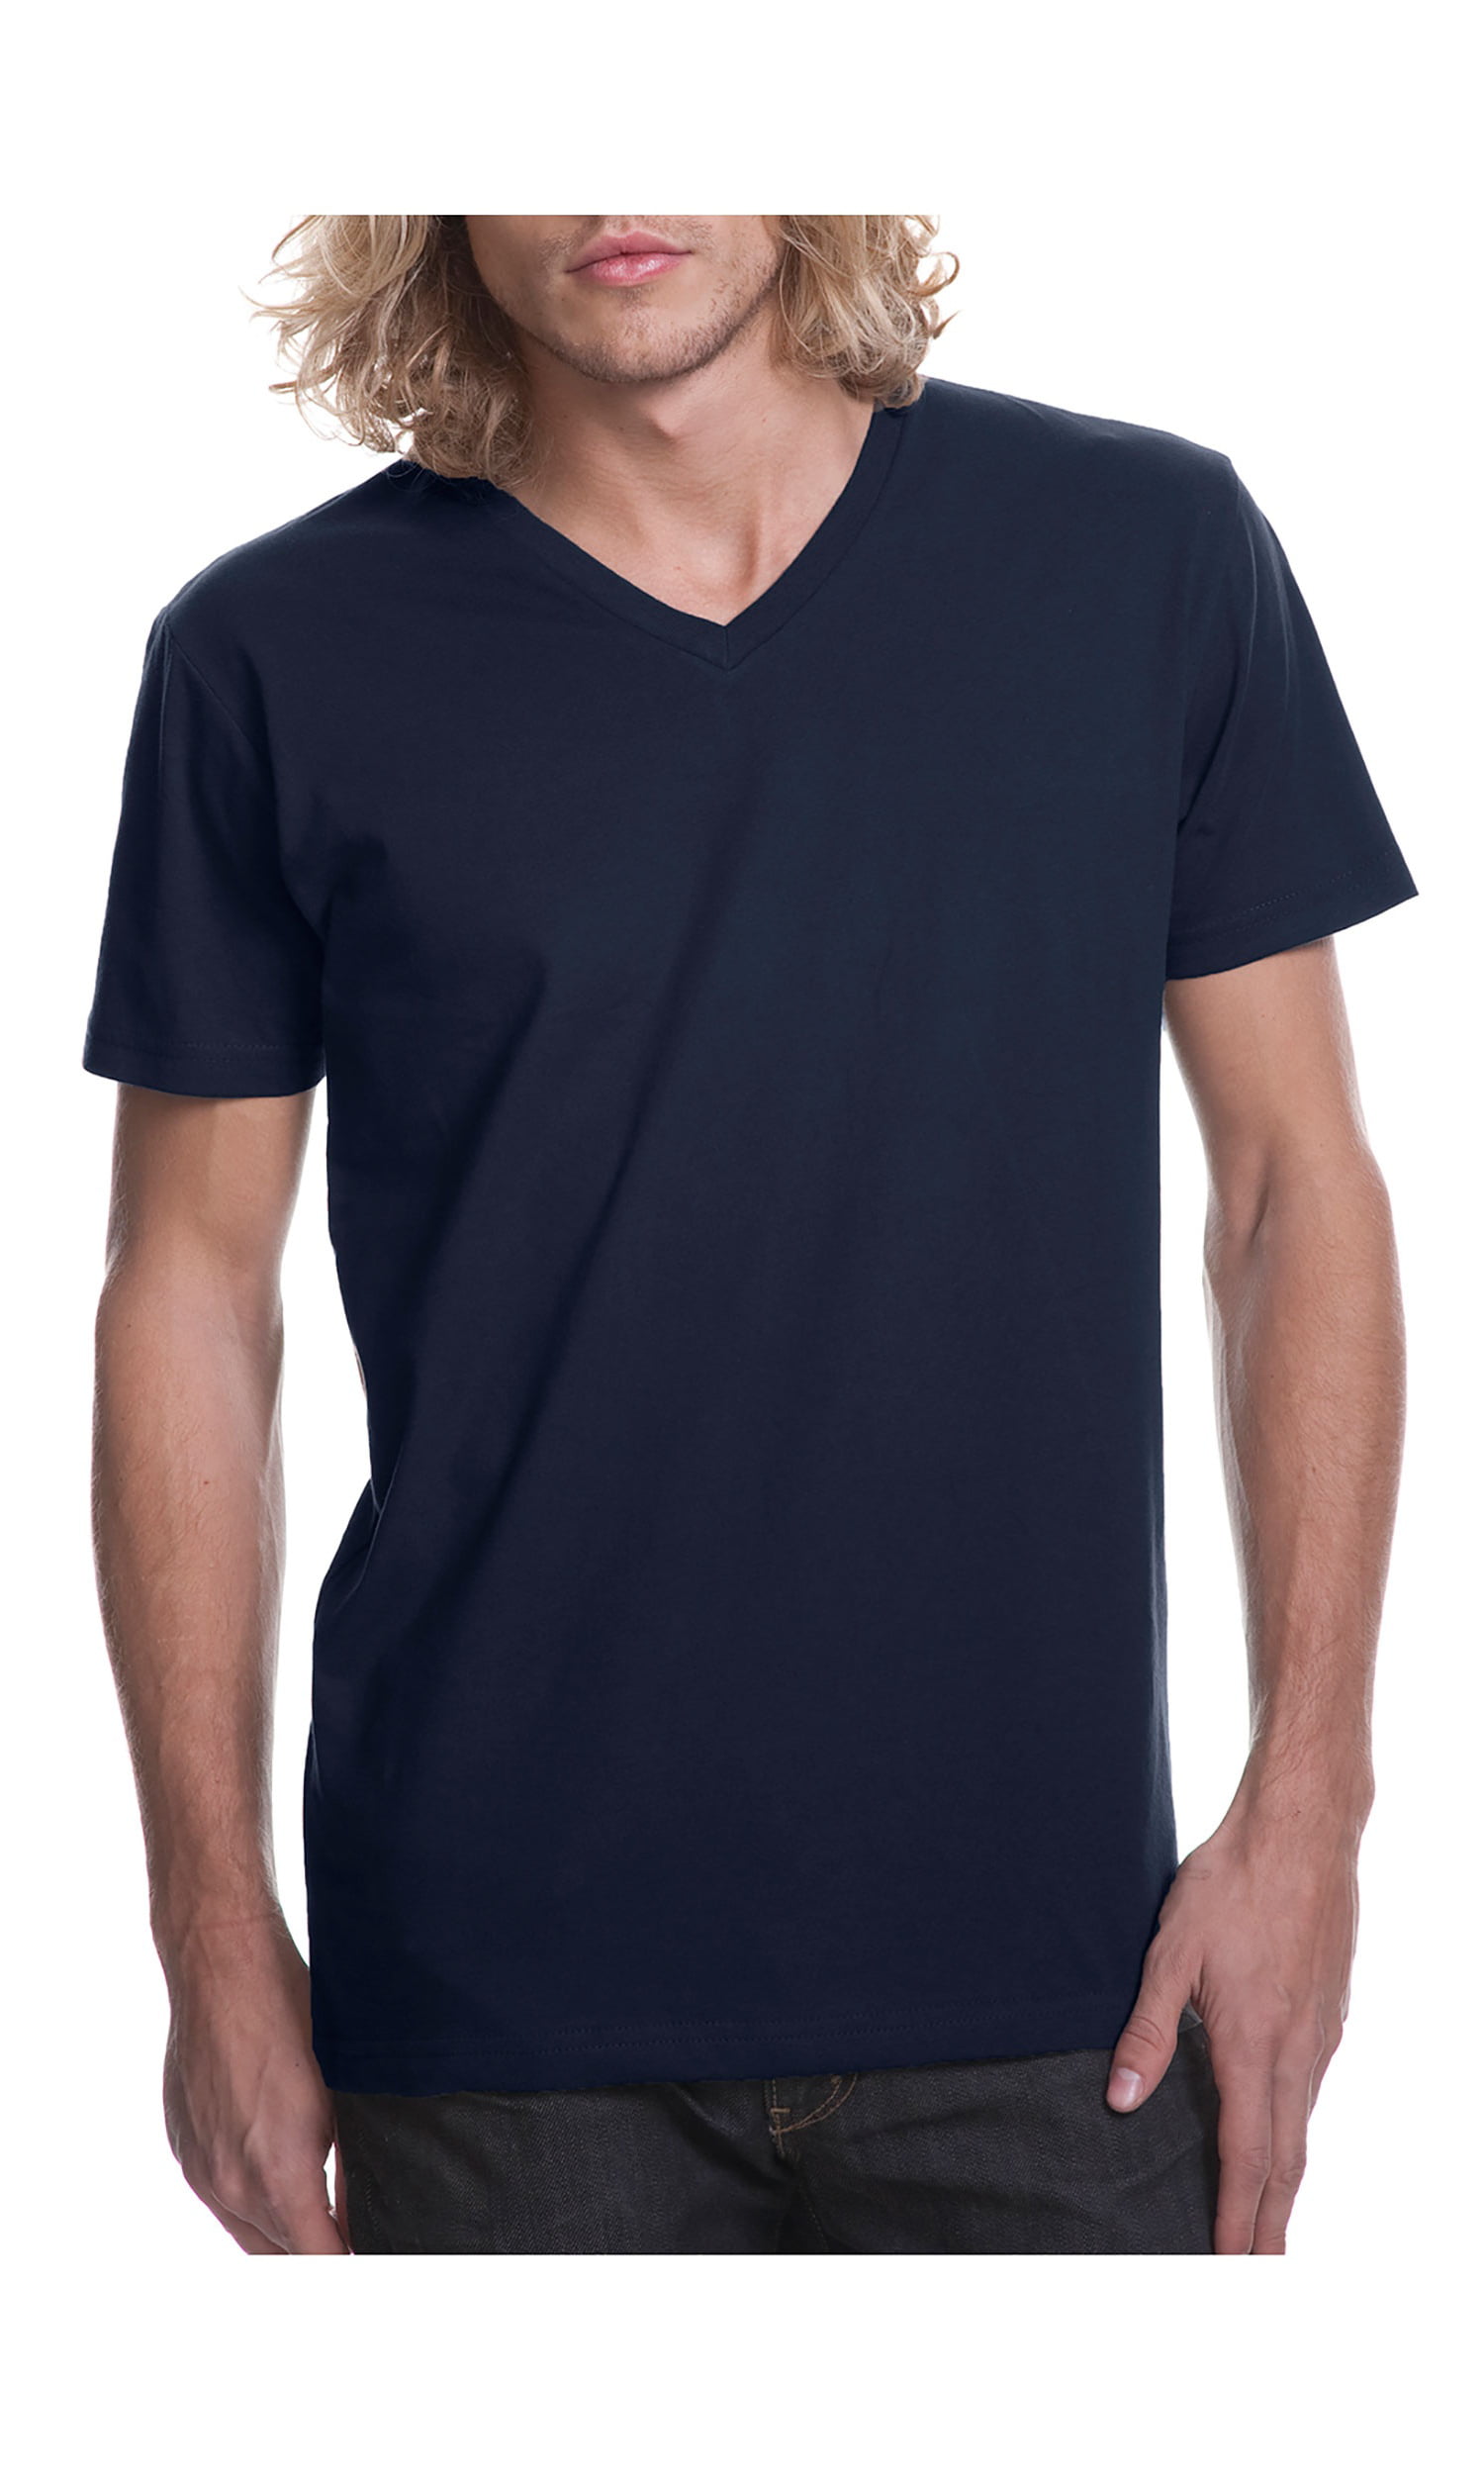 Midnight Navy XX-Large Next Level Mens Premium Fitted Short Sleeve V-Neck Tee